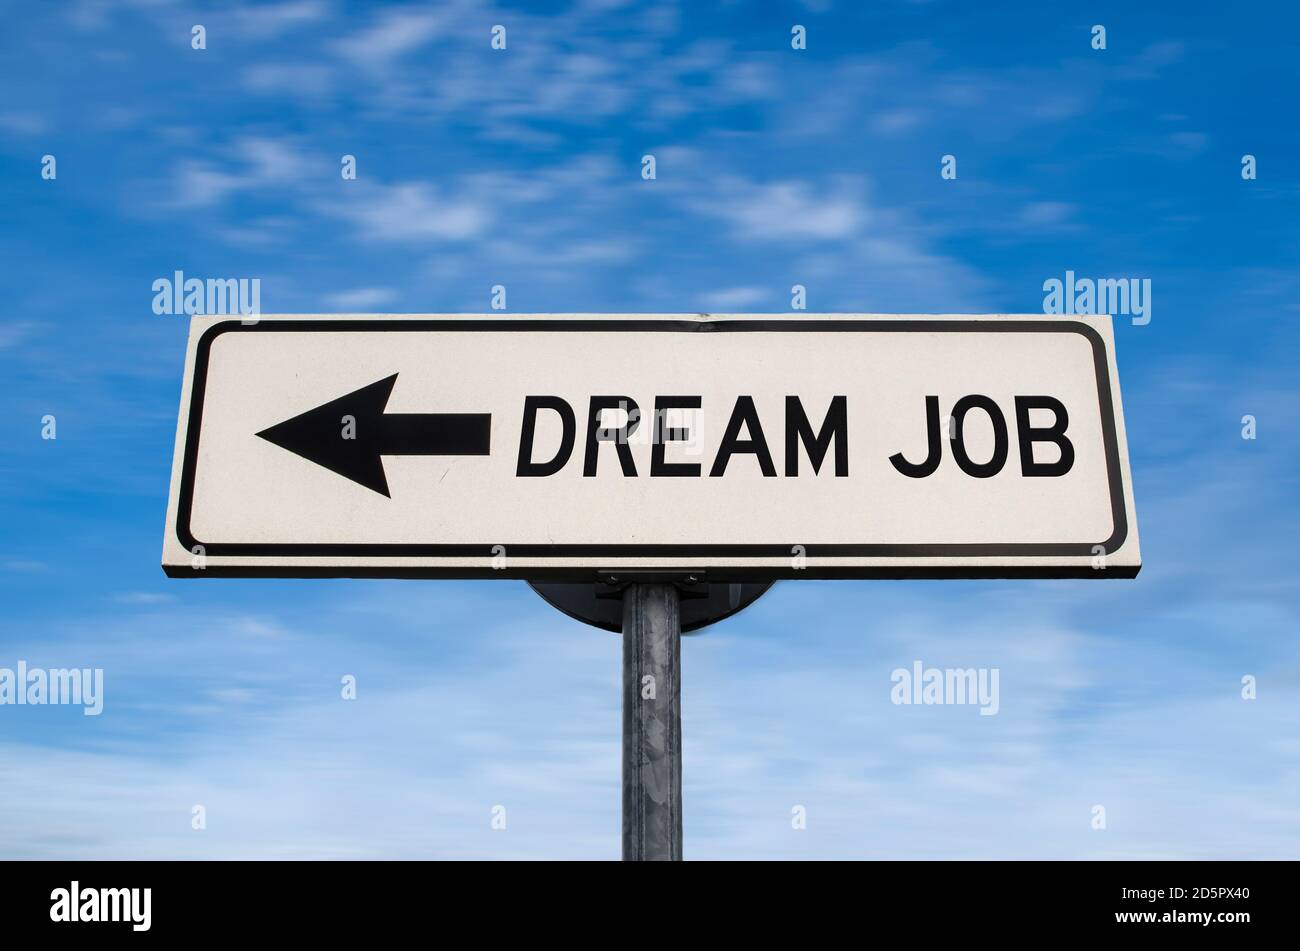 Dream job road sign, arrow on blue sky background. One way blank road sign with copy space. Arrow on a pole pointing in one direction. Search for bett Stock Photo